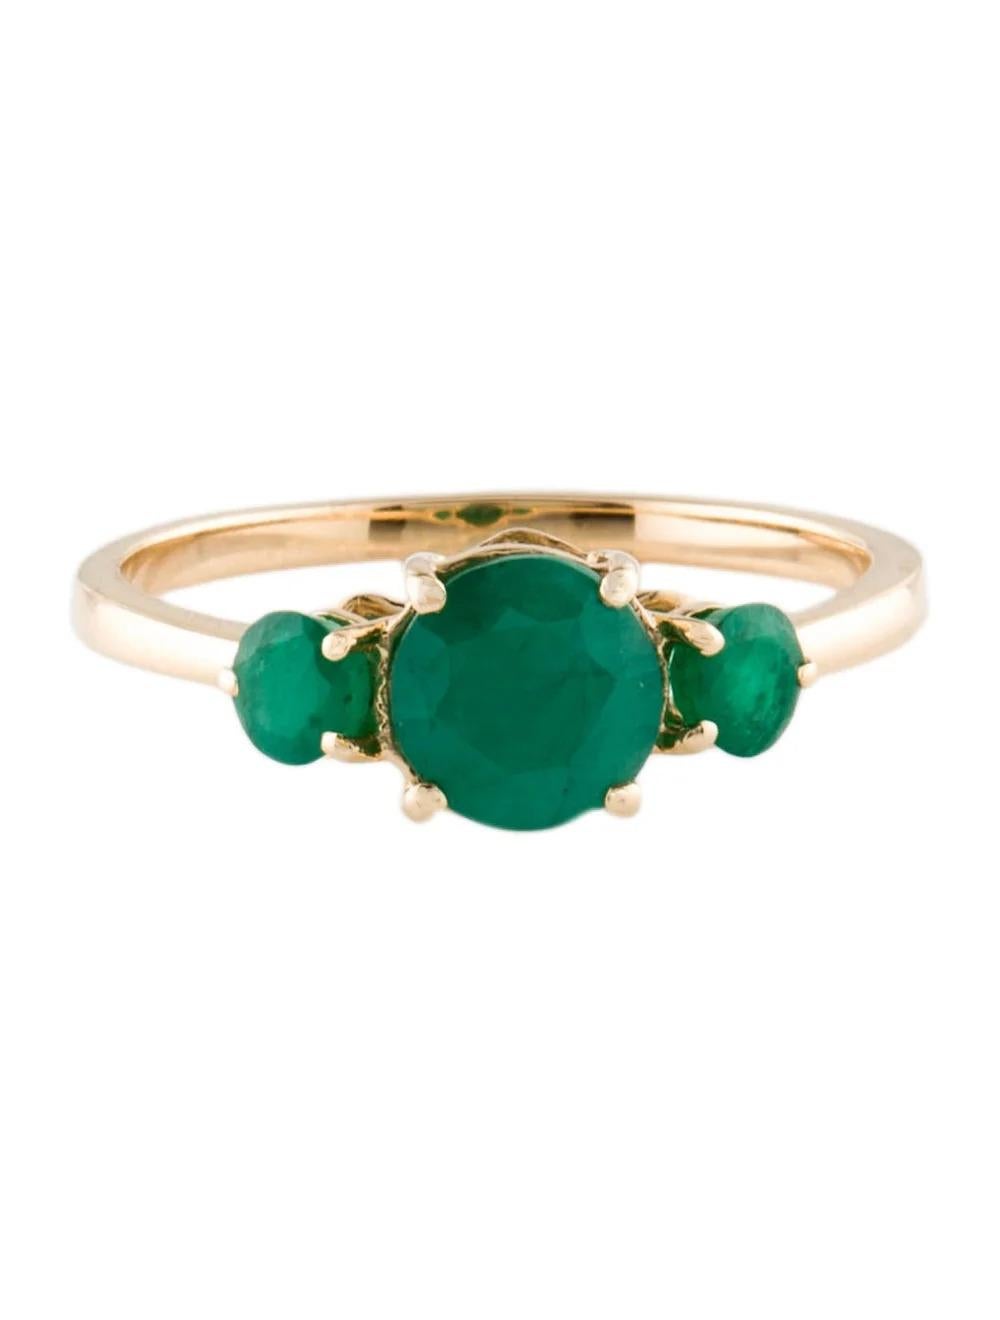 Round Cut 14K Emerald Cocktail Ring, Size 6.75, Stunning Yellow Gold, Genuine Gemstone For Sale